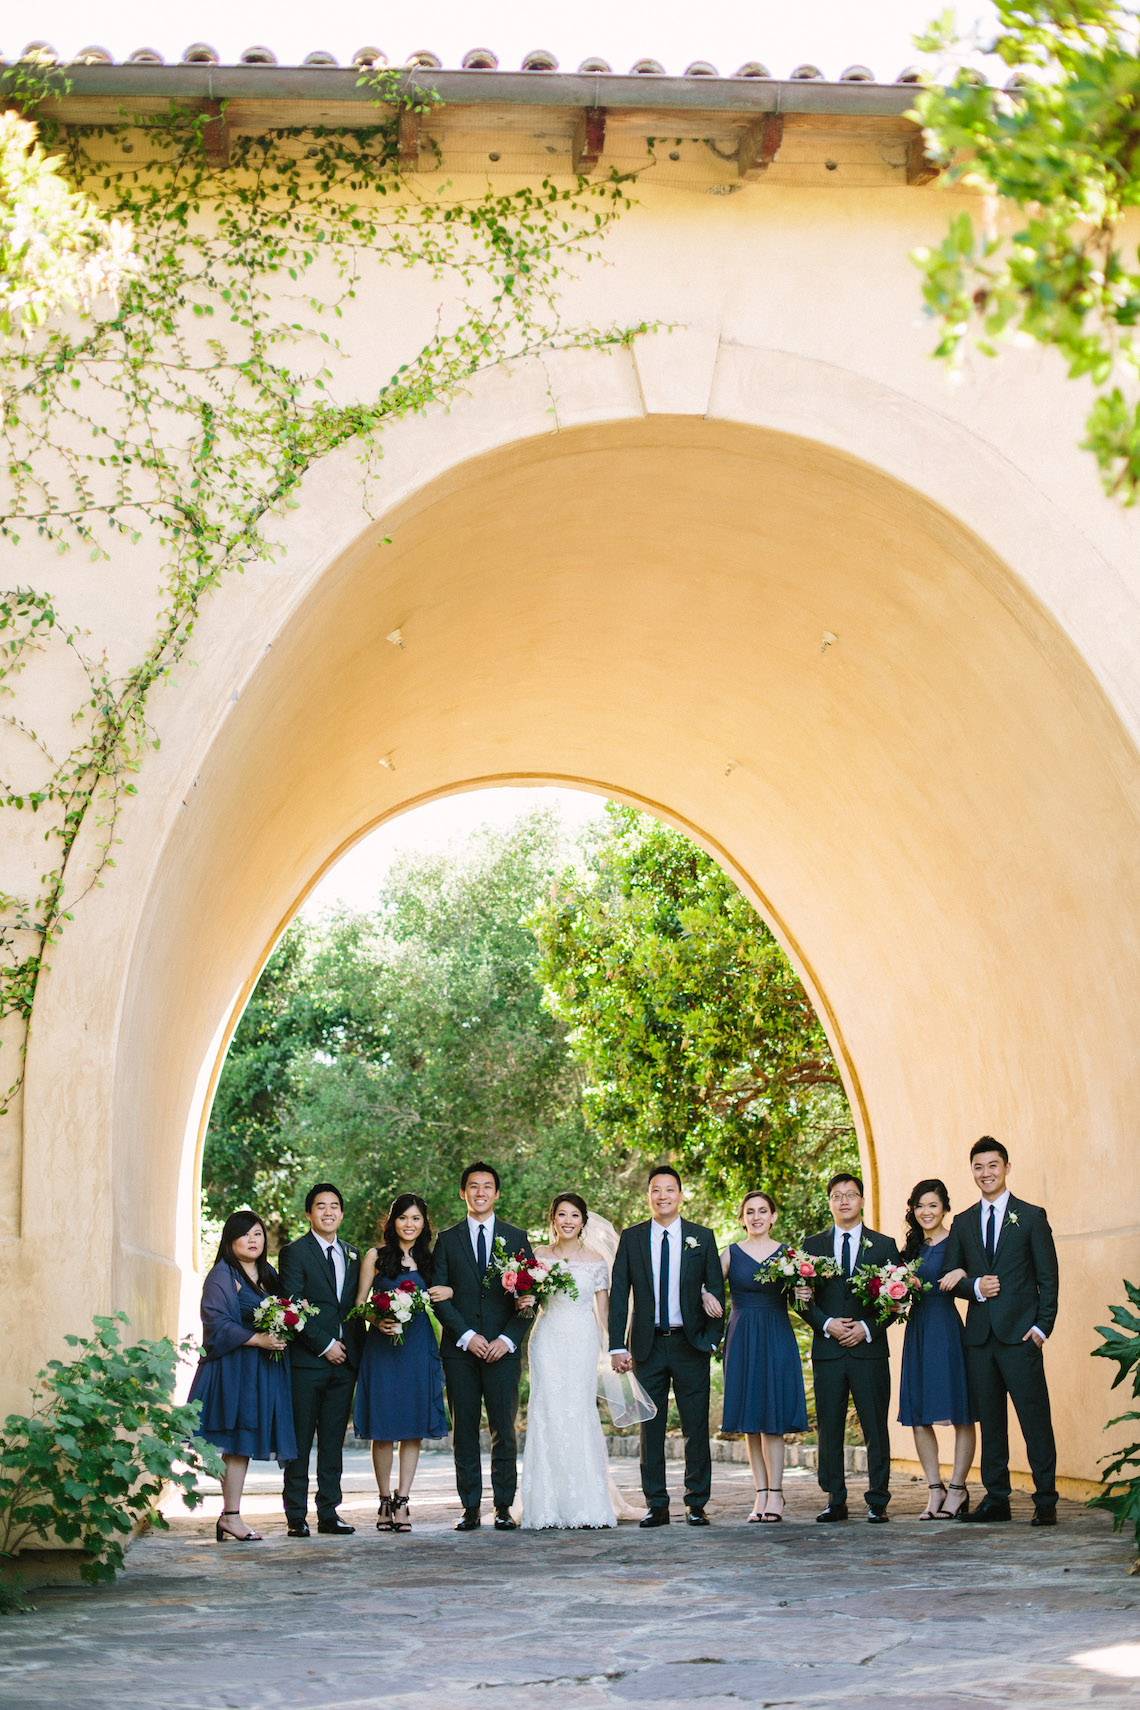 Romantic California Wedding with a Rustic Spanish Charm | Retrospect Images 20